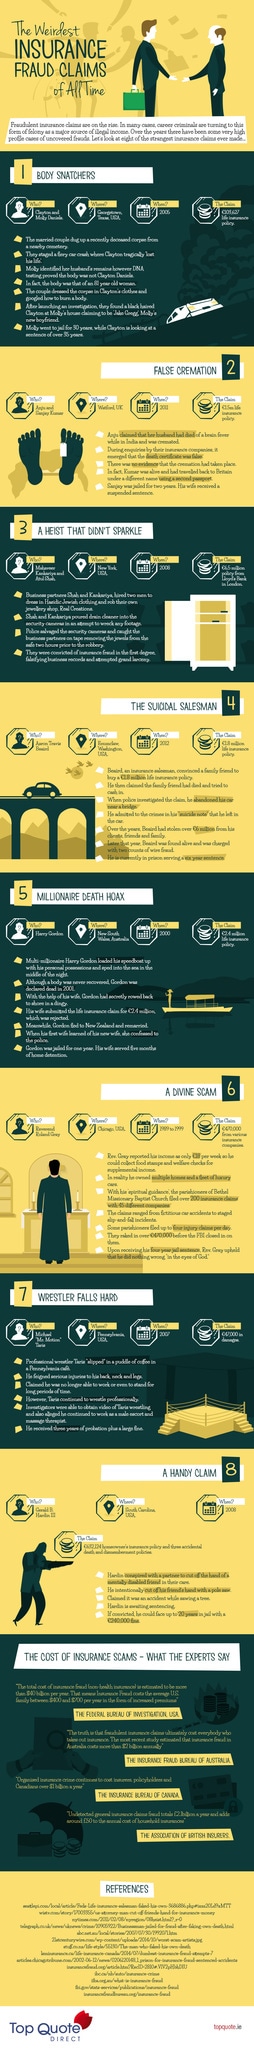 Weirdest-Insurance-Claim-Frauds-of-All-Time-Infographic